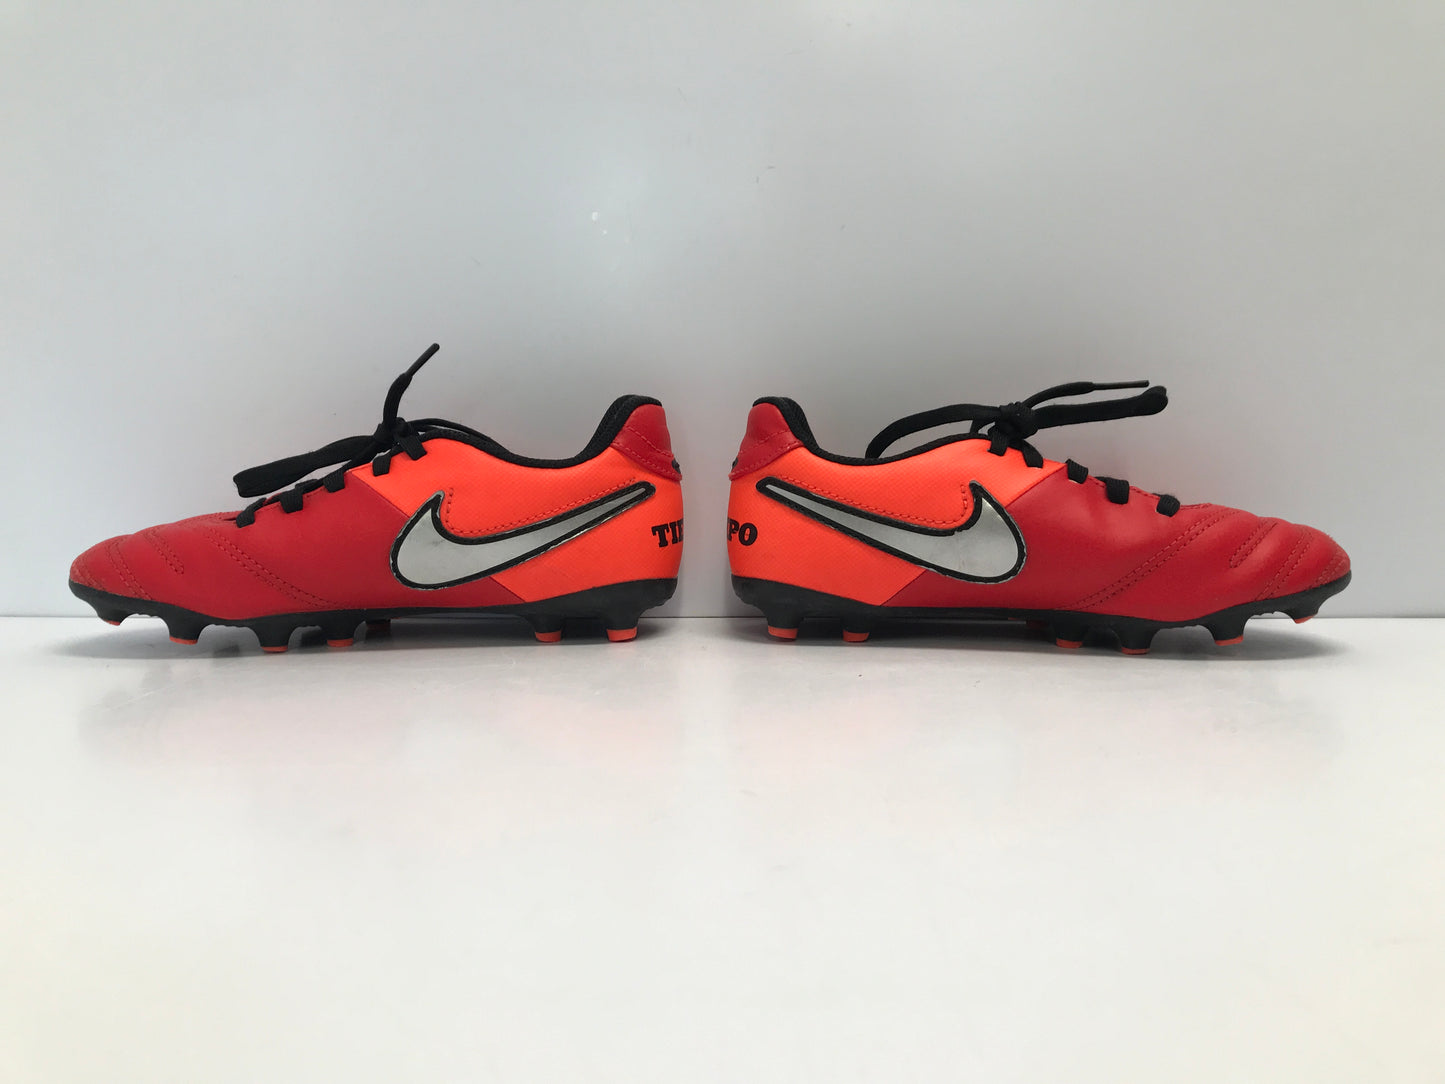 Soccer Shoes Cleats Child Size 1 Nike Tiempo Red Black Tangerine